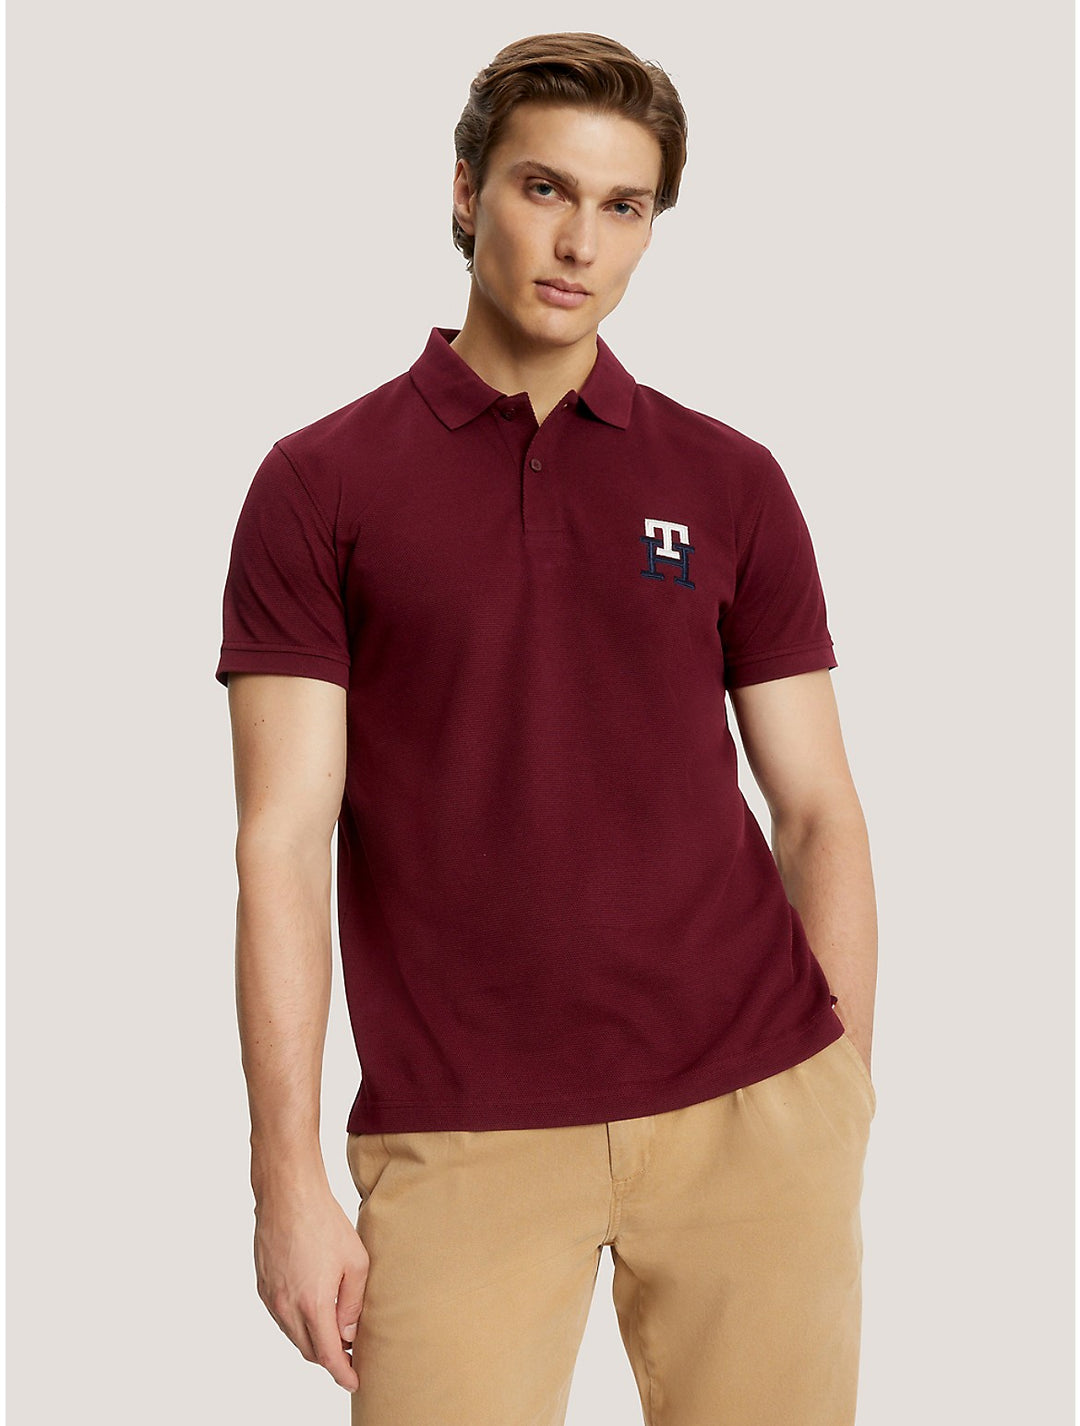 Tommy Hilfiger Mens S/S Polo AT-78J9451